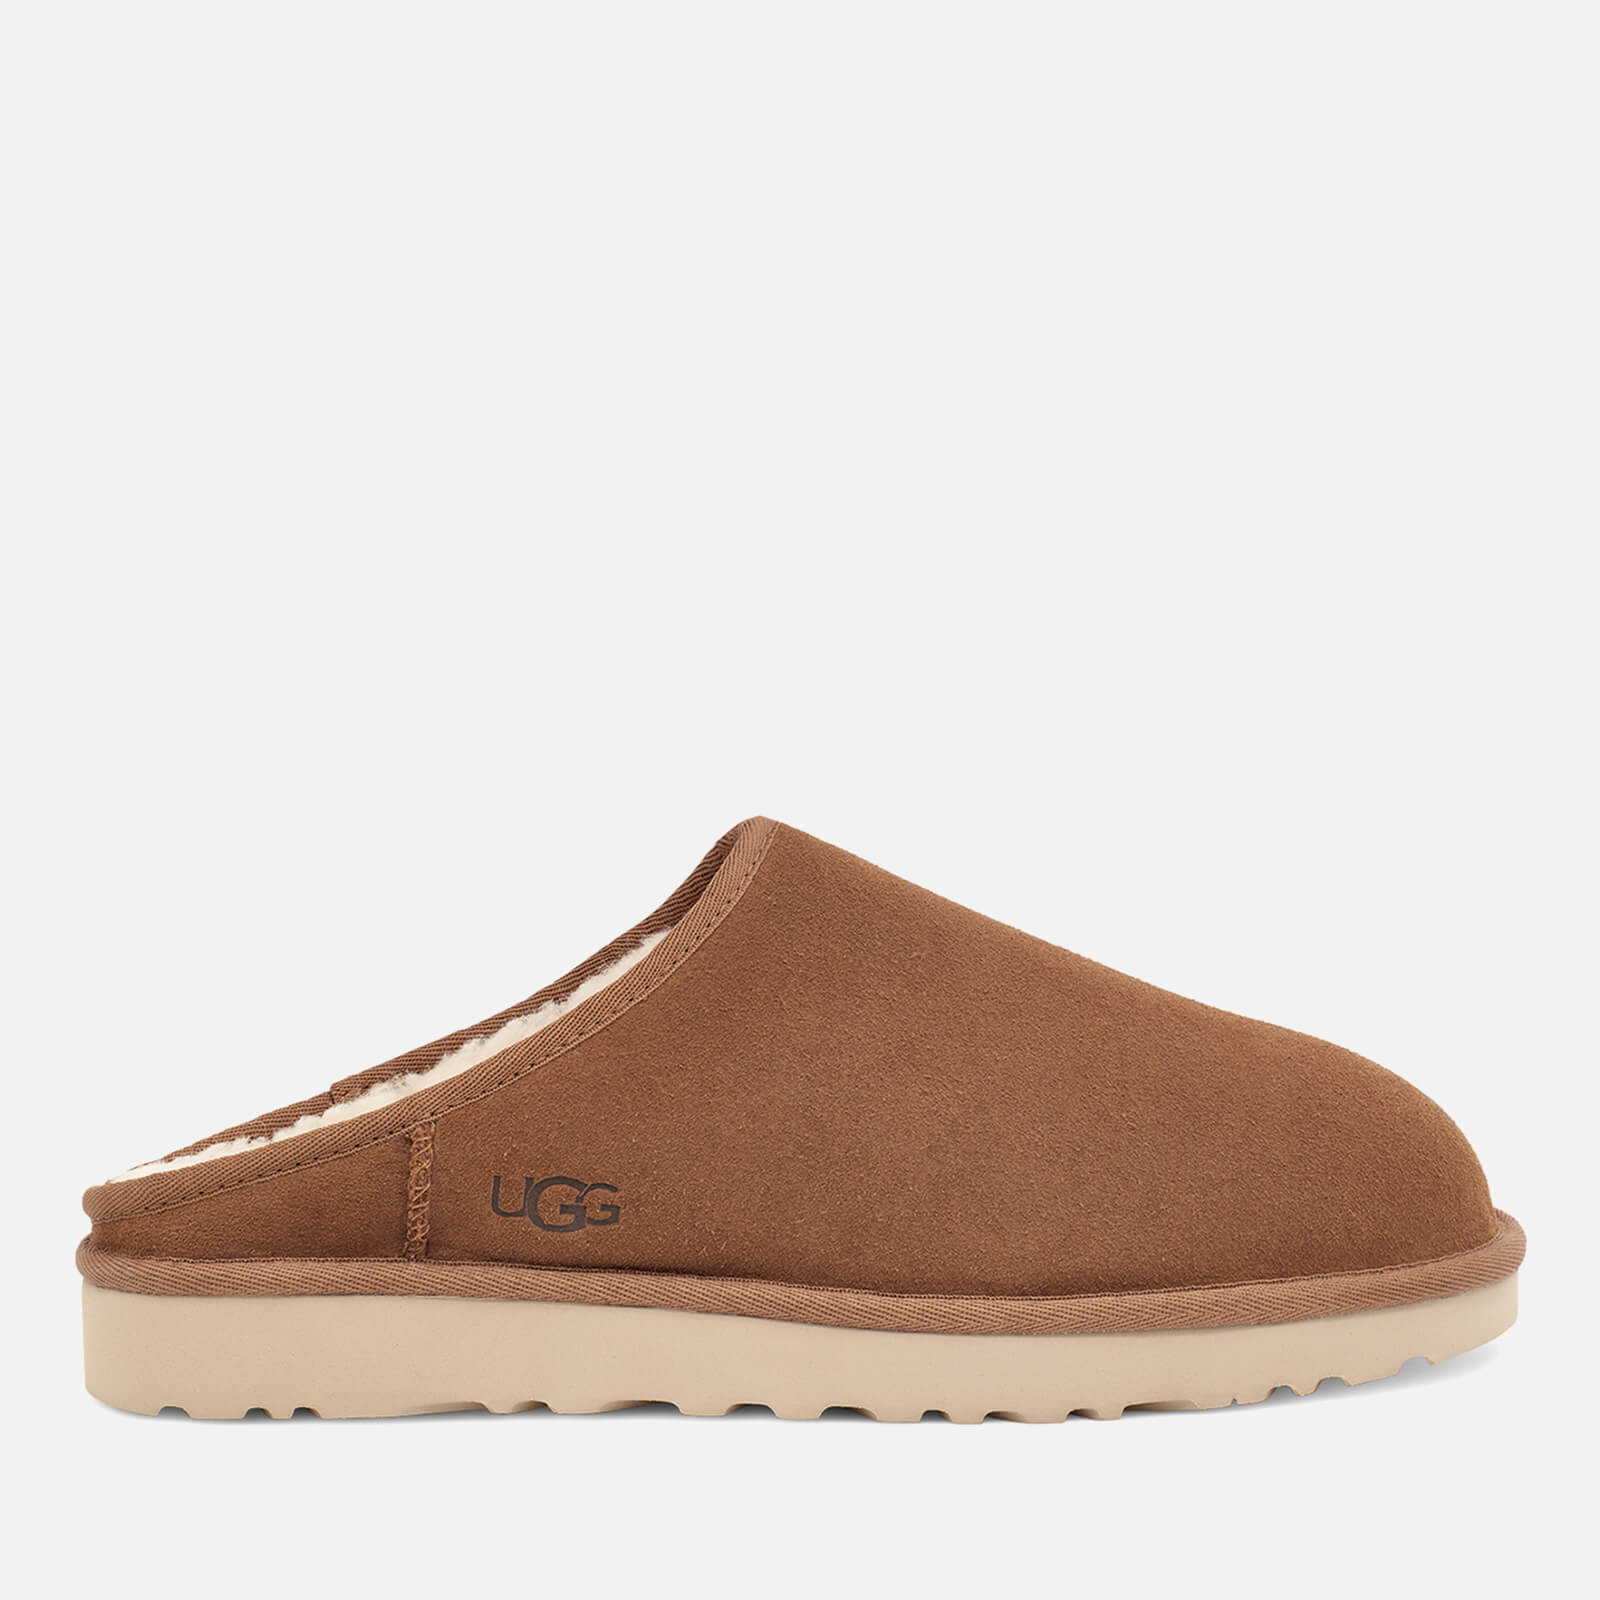 UGG Men’s Classic Suede Slippers